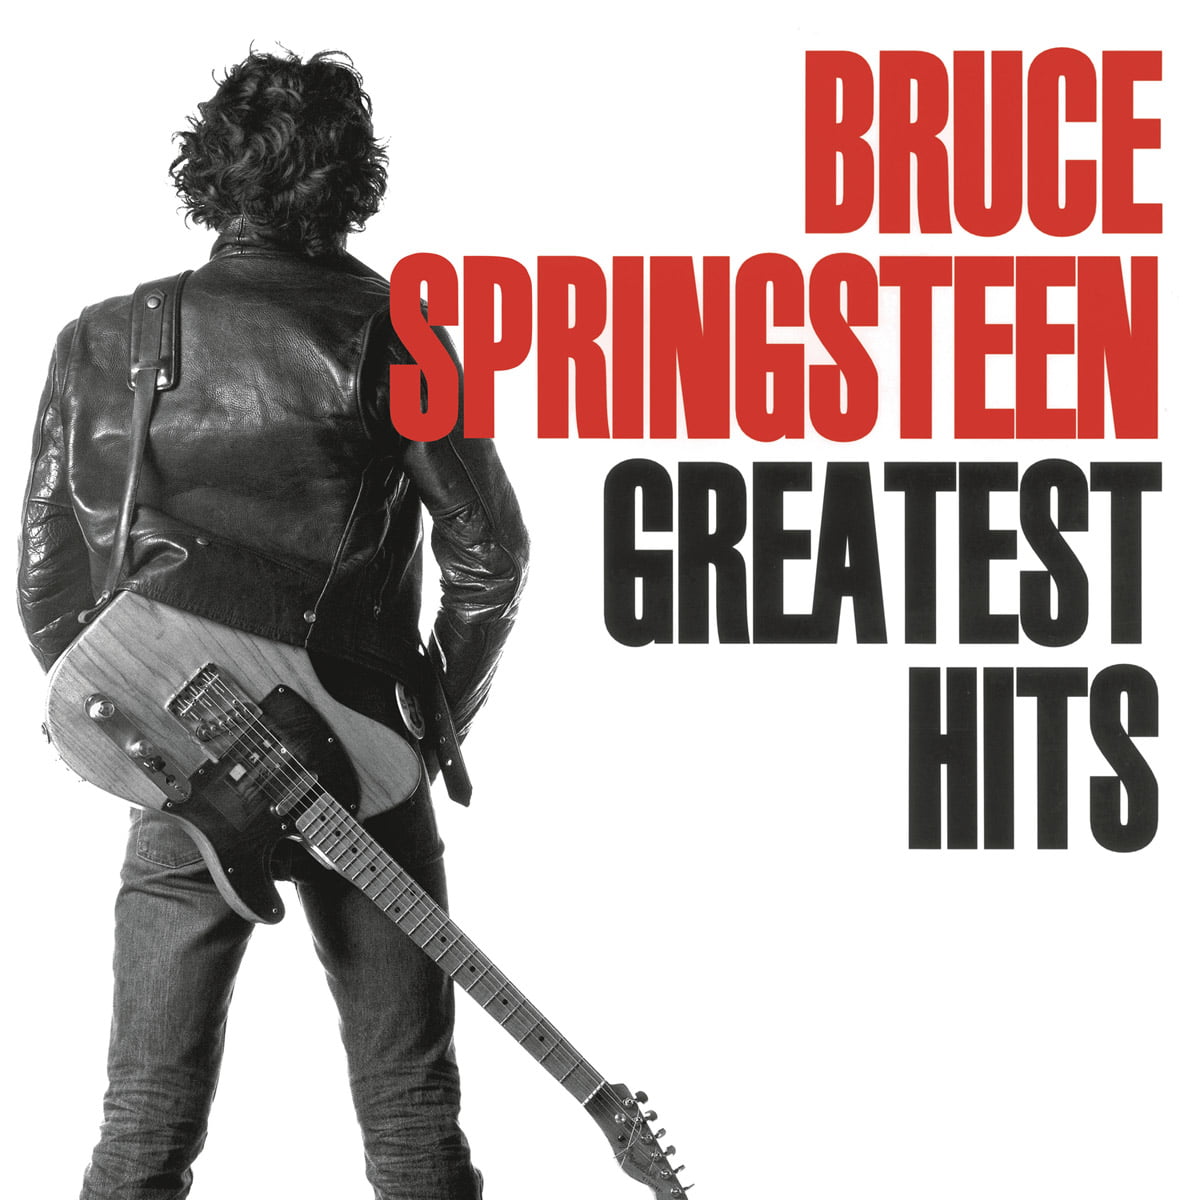 Bruce Springsteen Greatest Hits (1995, CD)